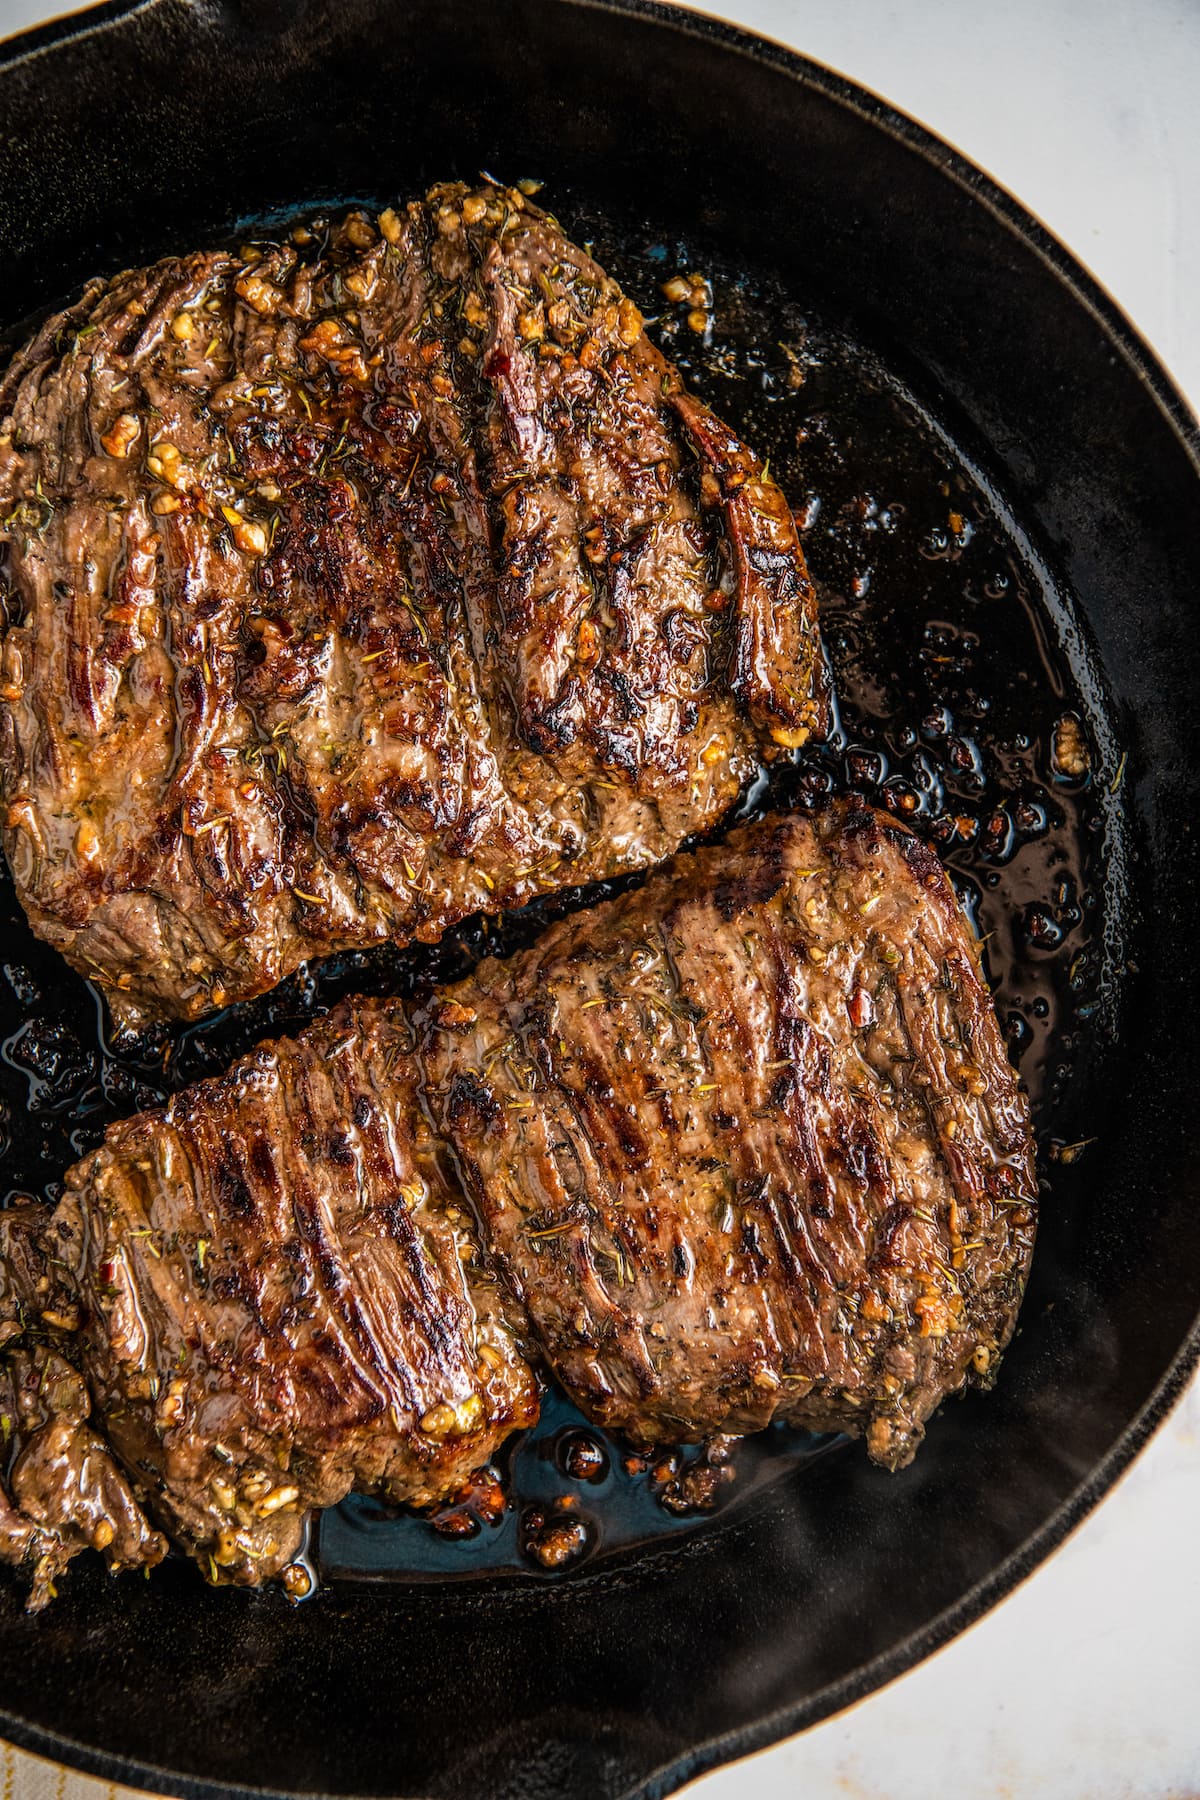 Overhead view of two skirt steaks in a cast iron skillet